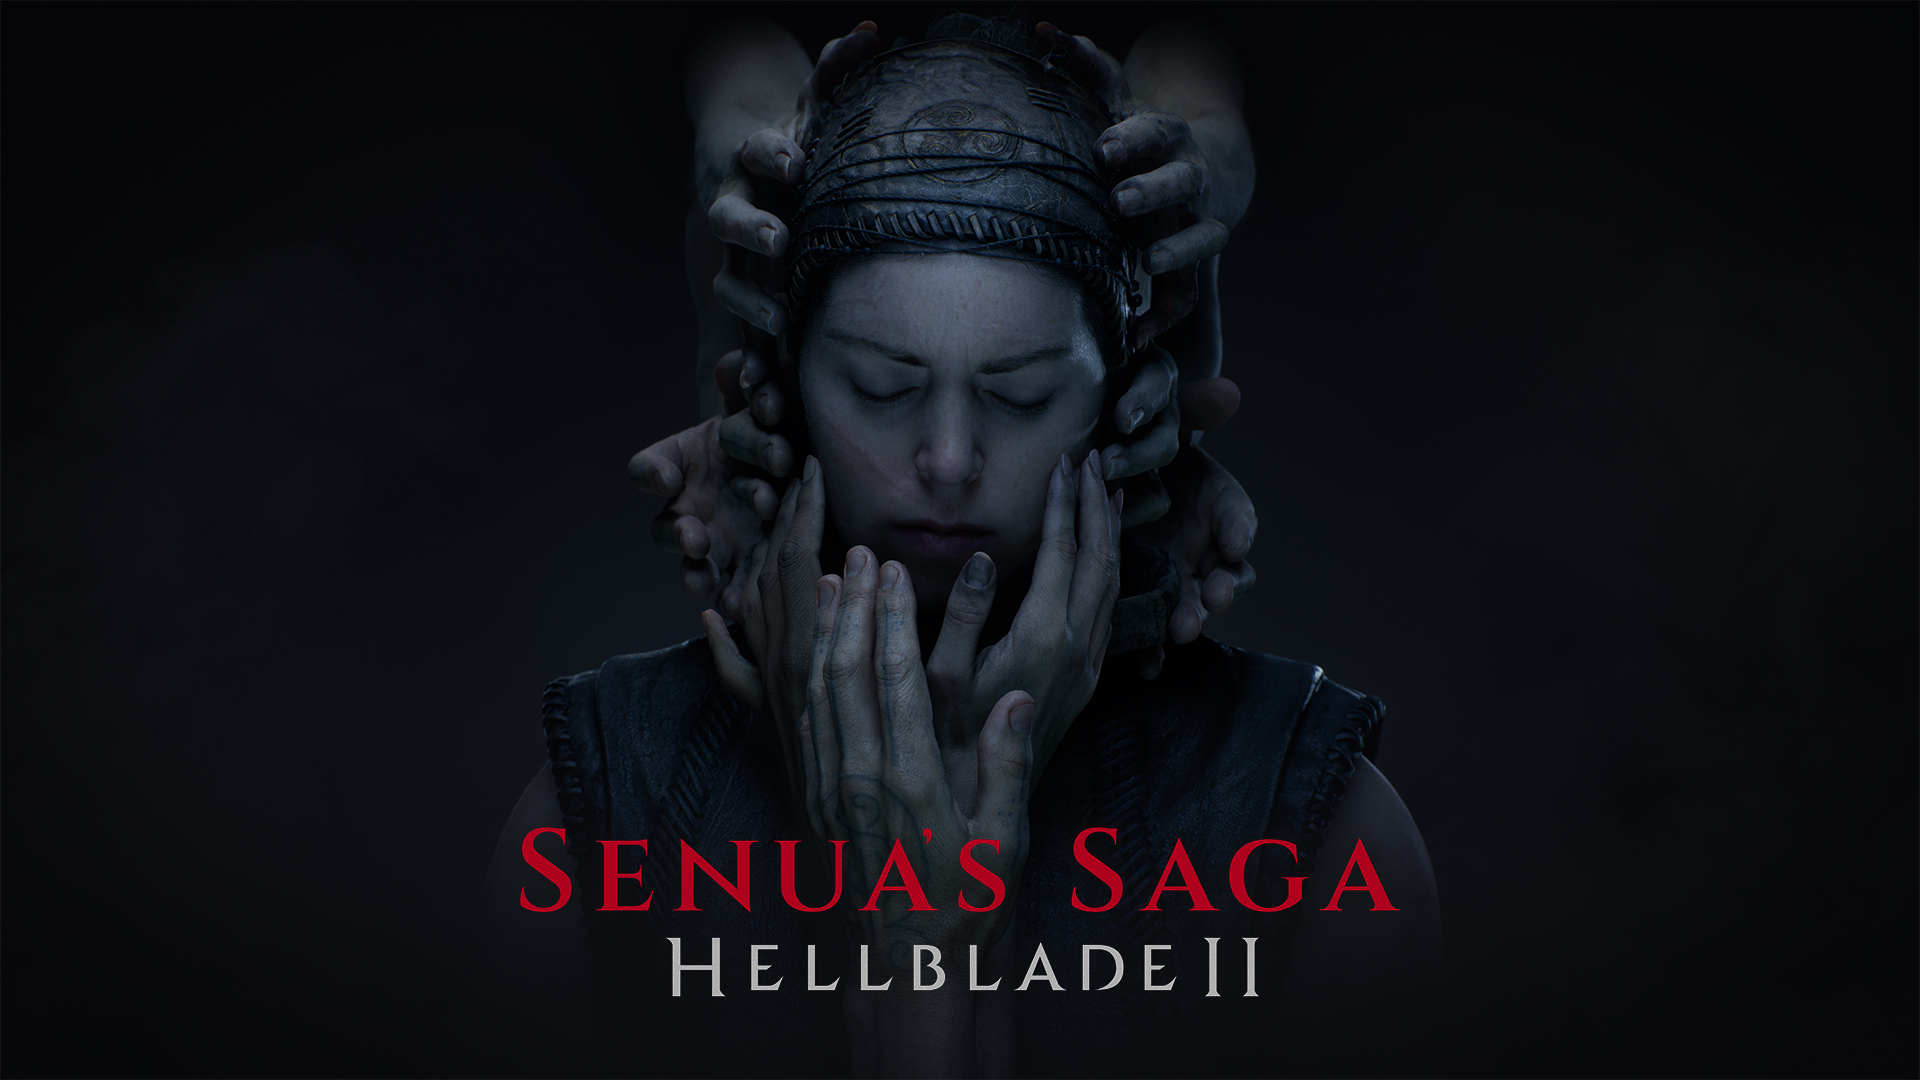 Senua's Saga: Hellblade 2 on Xbox Developer_Direct: some details on development and gameplay and confirmed release date - 21 May